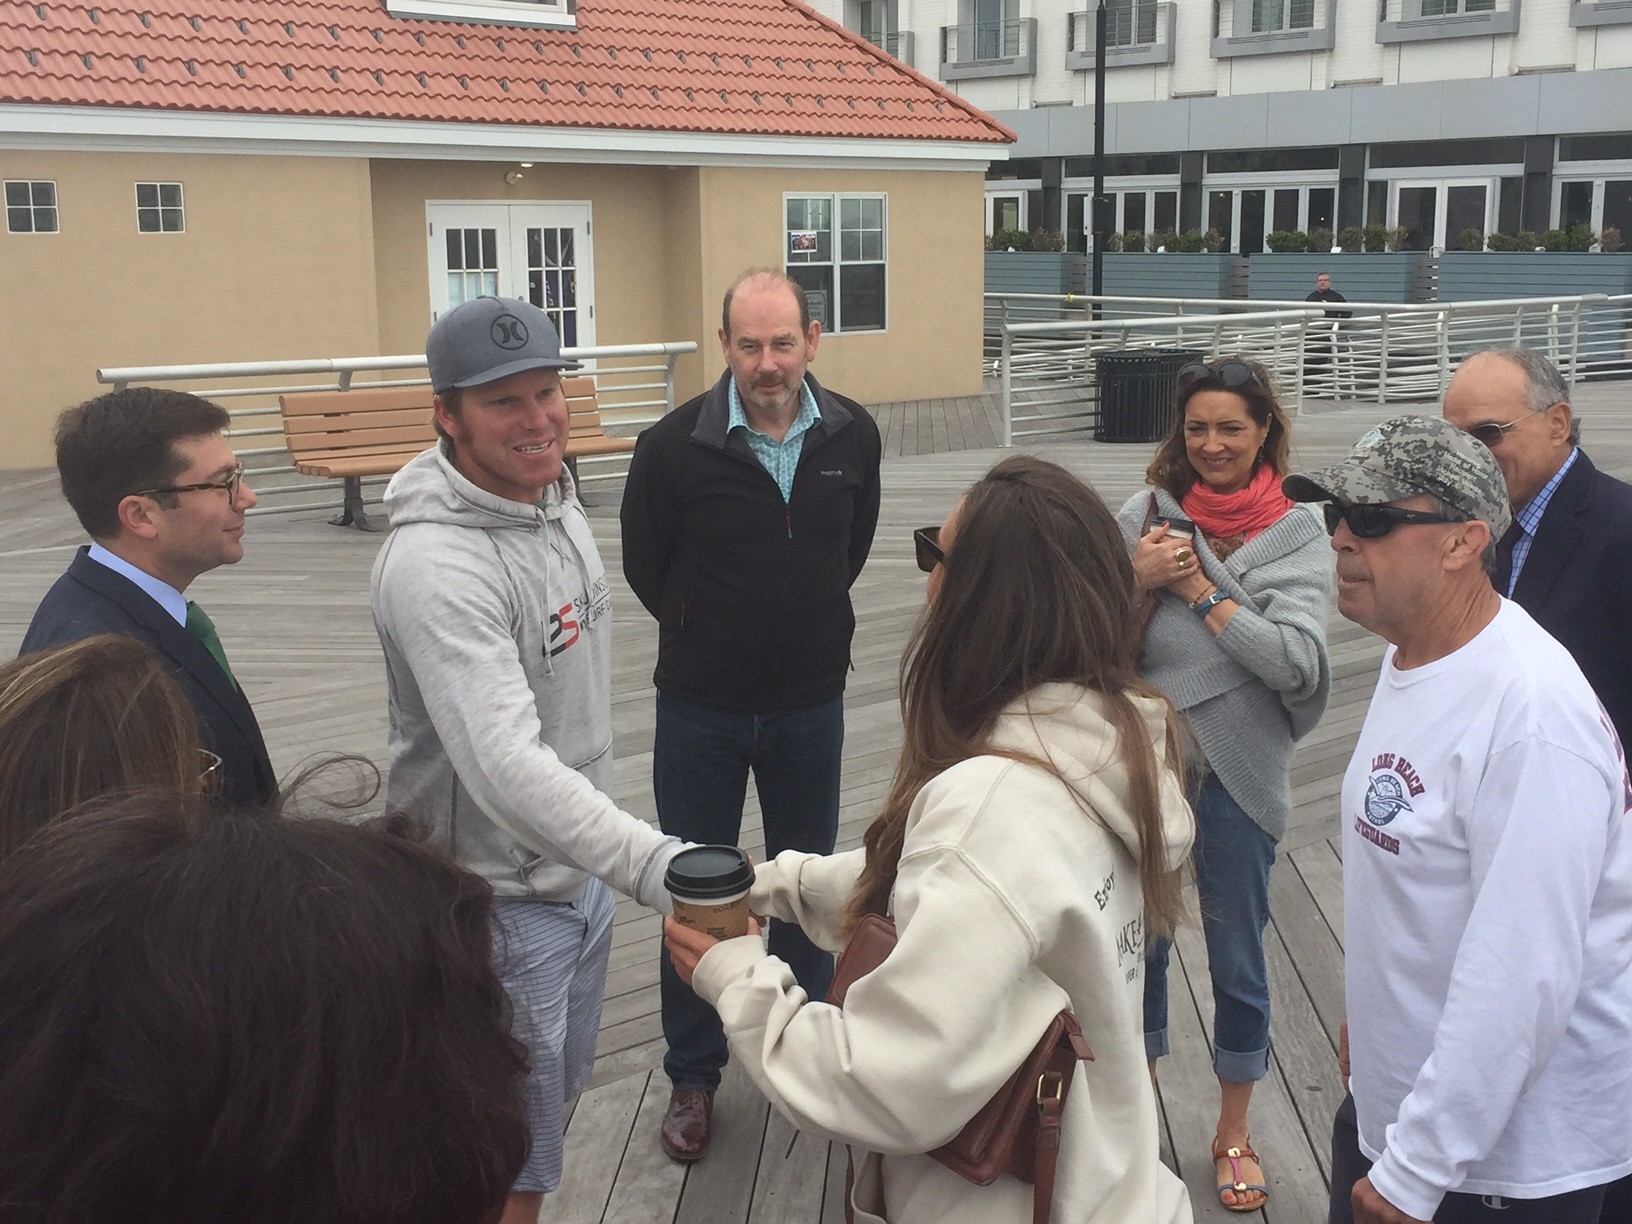 Cliff Skudin greeted Jenny Francis and the other United Kingdom residents on the boardwalk and talked about the surfing culture in Long Beach, including Skudin Surf’s camps and lessons.